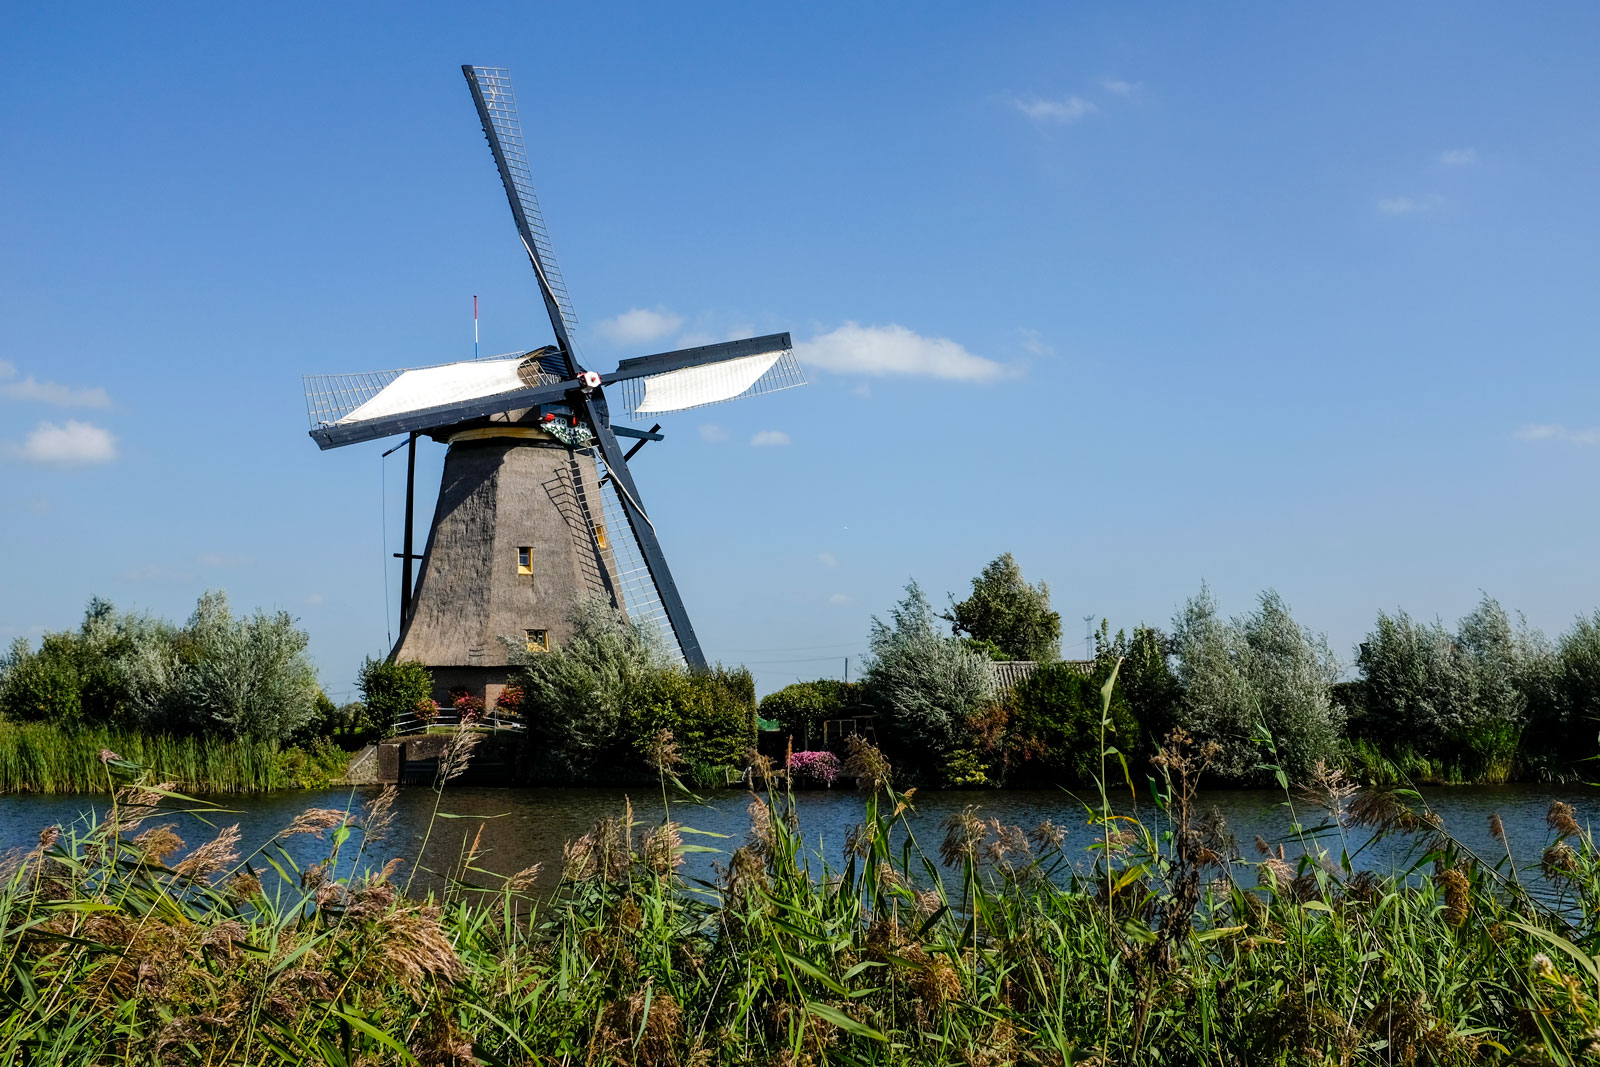 A windmill at Kinderdijk in The Netherlands